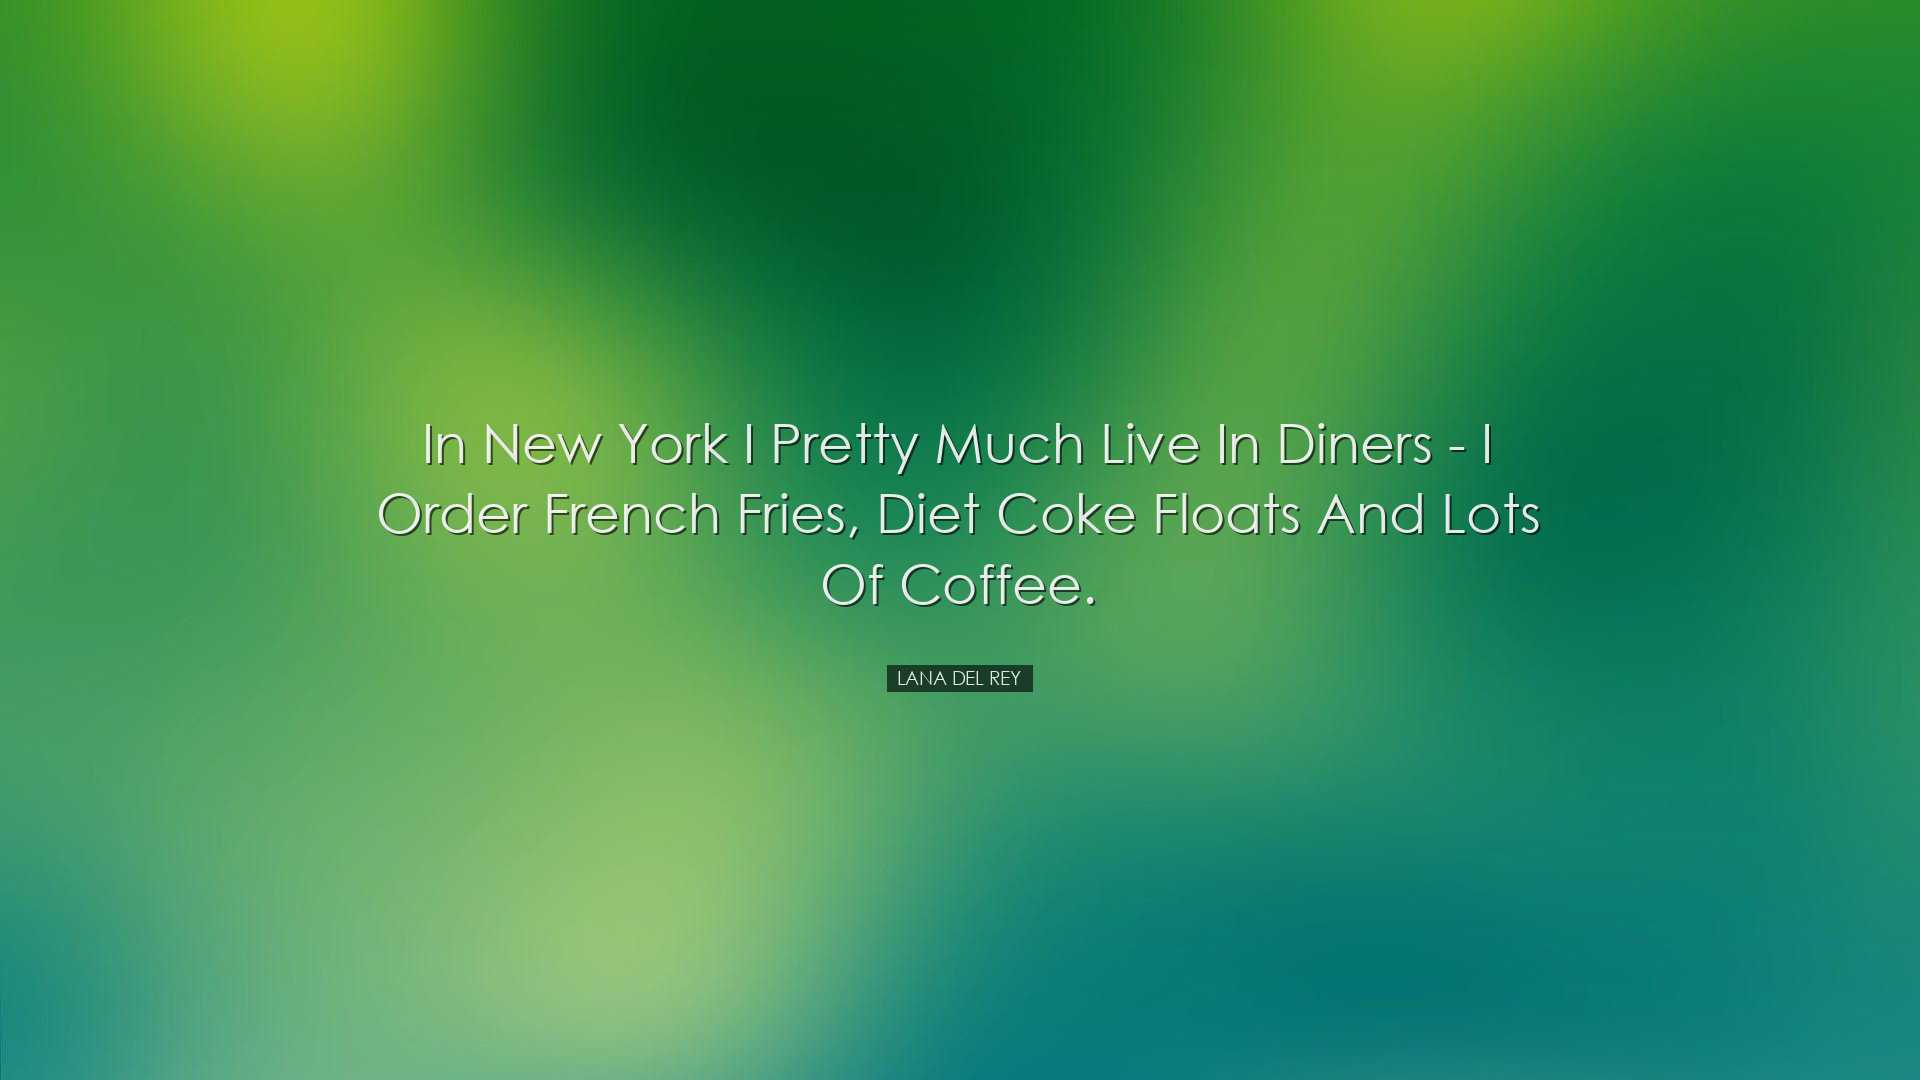 In New York I pretty much live in diners - I order French Fries, D